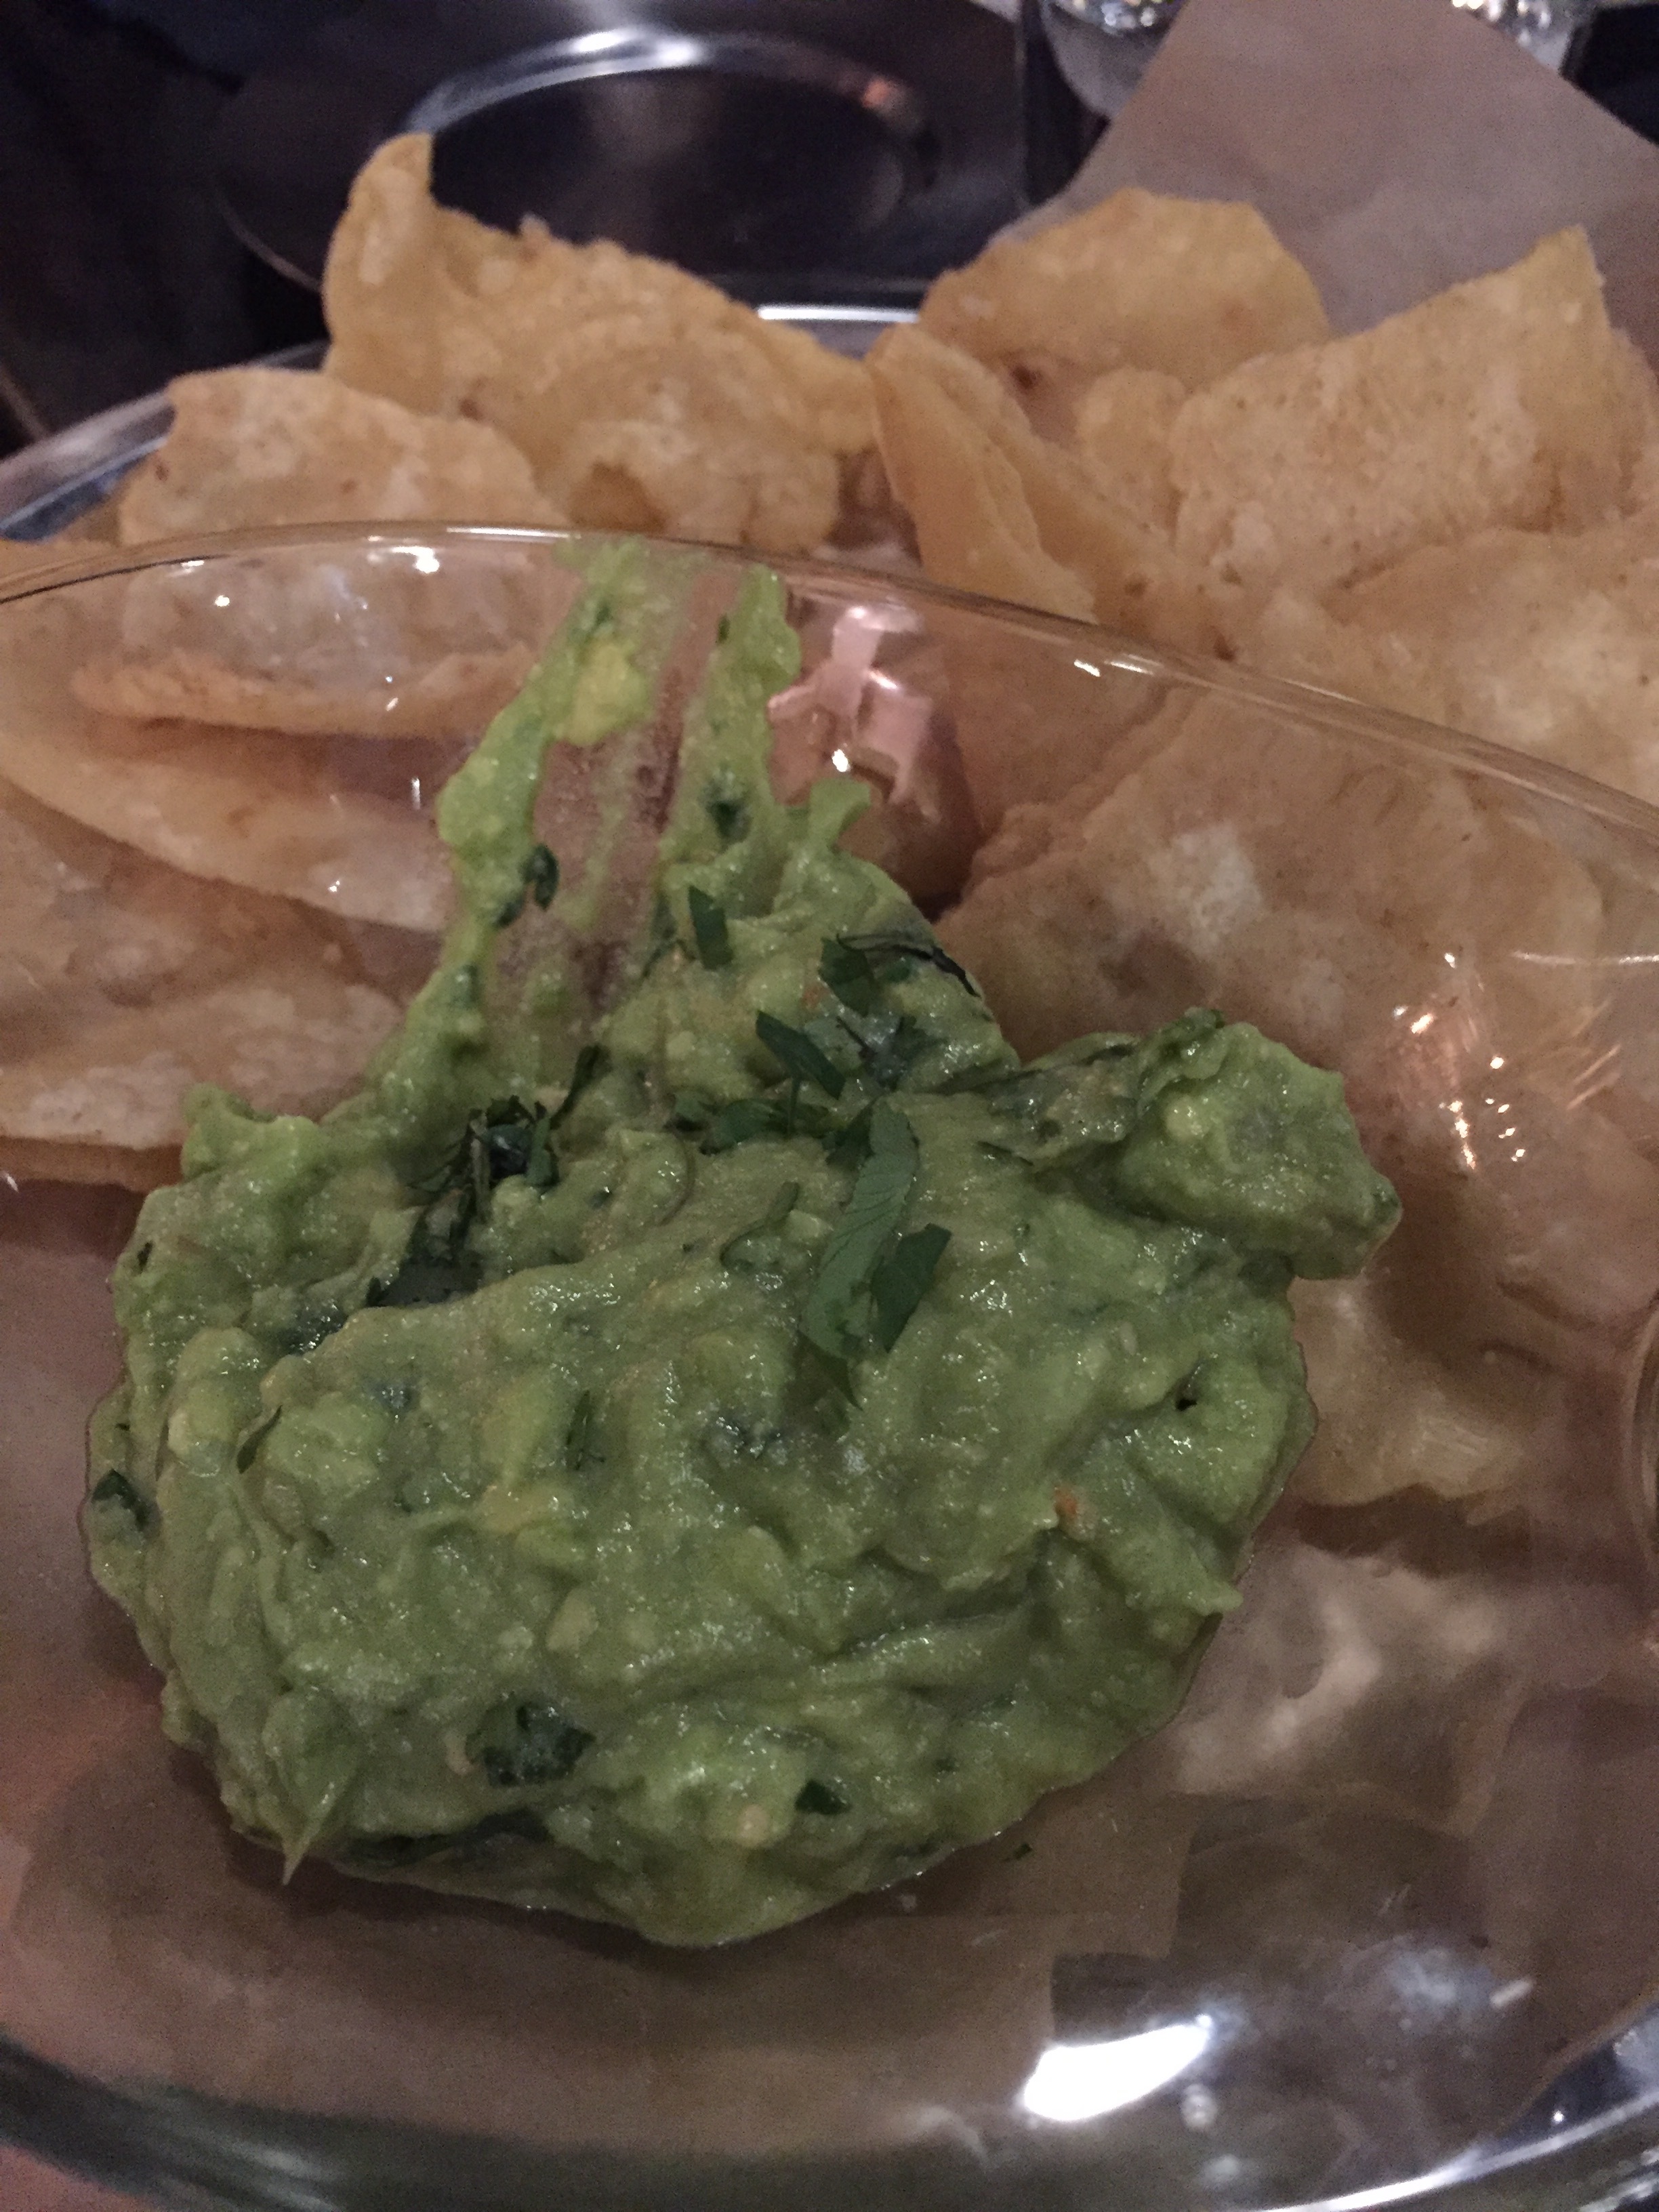 Chewy chips & guac